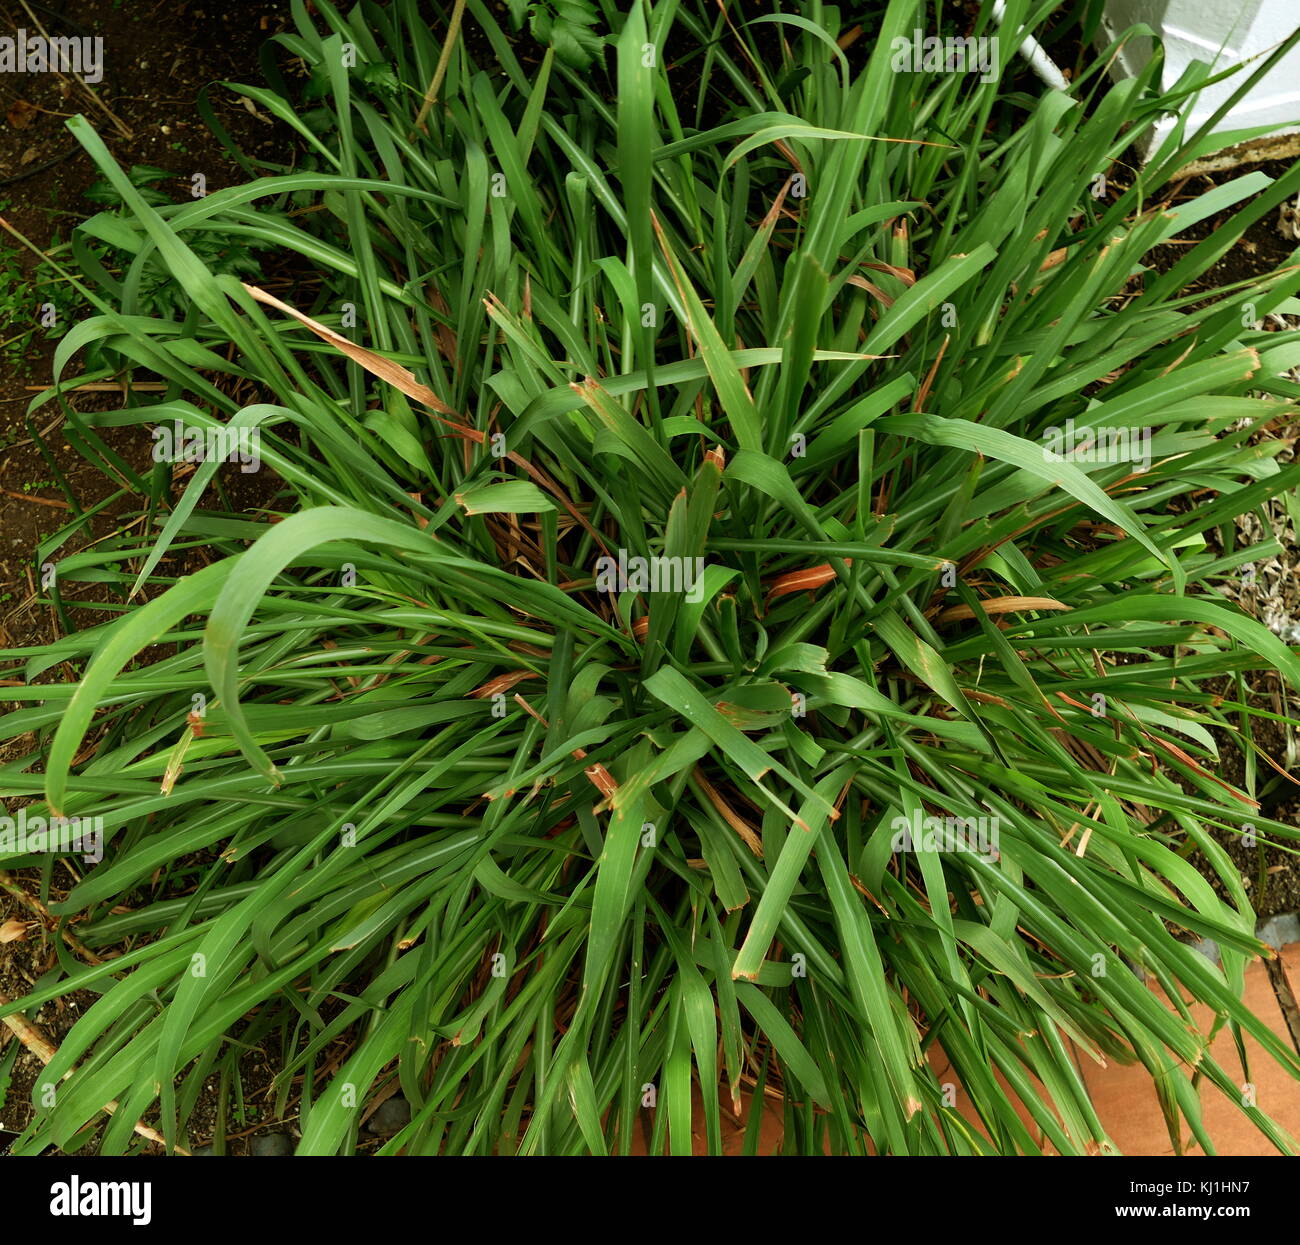 Cymbopogon, better known as lemongrass; genus of Asian, African, Australian, and tropical island plants, in the grass family. Some species (particularly Cymbopogon citratus) are cultivated as culinary and medicinal herbs because of their scent Stock Photo